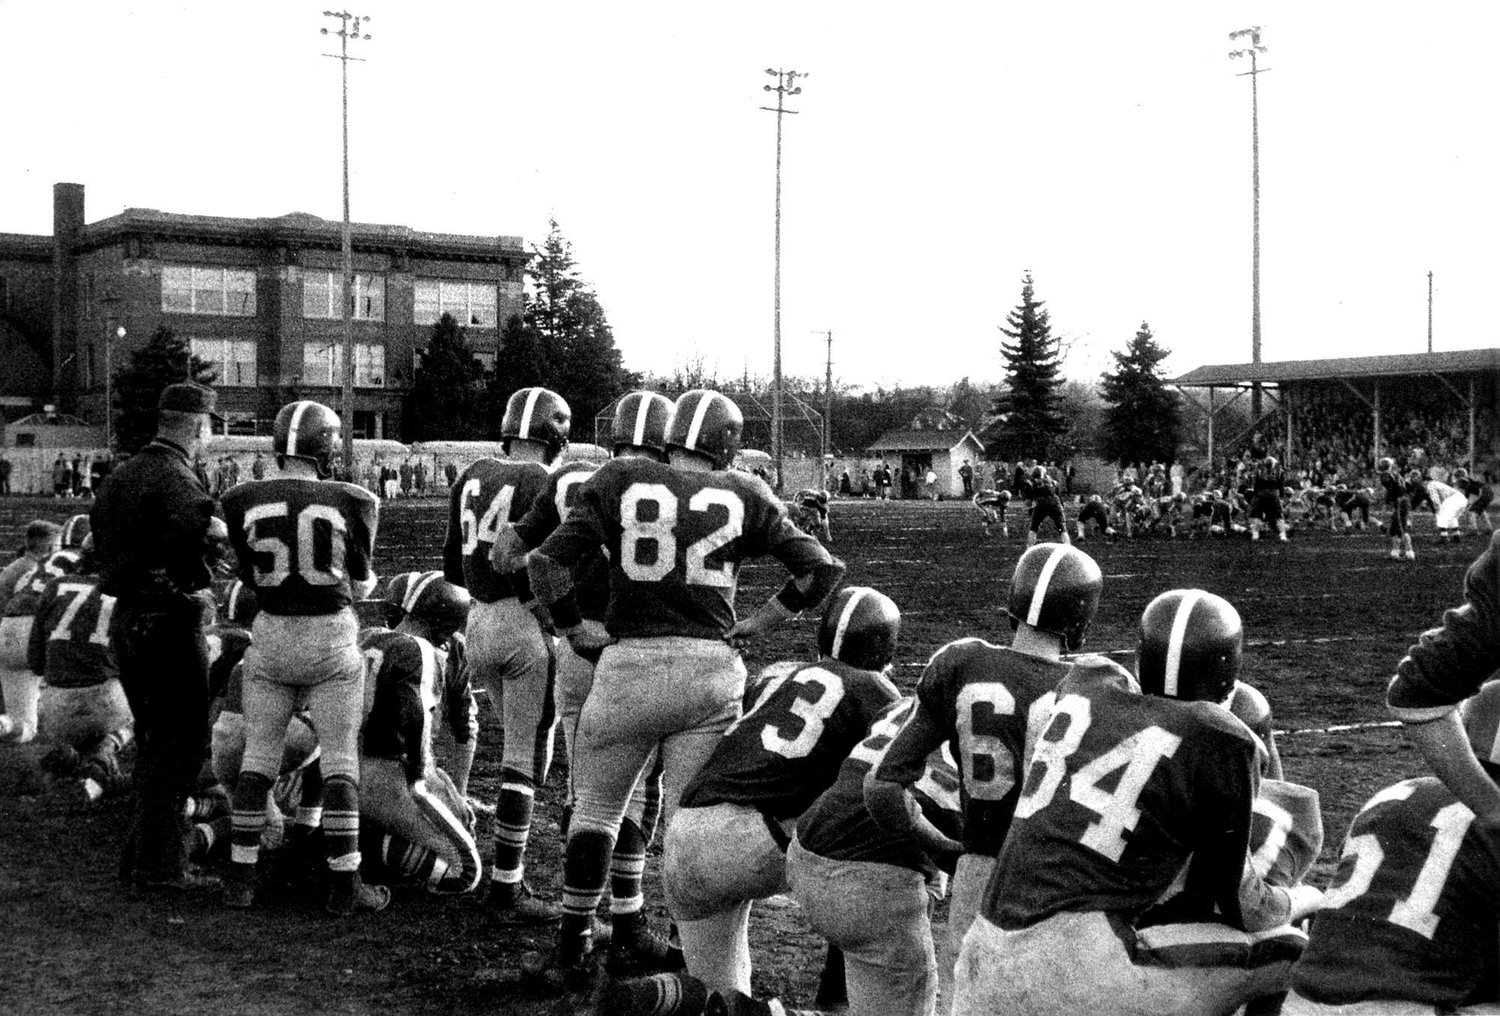 This photo from 1958 or 1959 shows the Thanksgiving football game between Centralia and Chehalis. The game was played at Noble Field at the old Centralia High School, which was eventually leveled to make room for Centralia College. Chehalis coach Bill Stefon, at left, is shown talking with Allan Allie, No. 50, a future Pe Ell coach. This photo and information originally submitted by Bill Stefon for Our Hometowns.